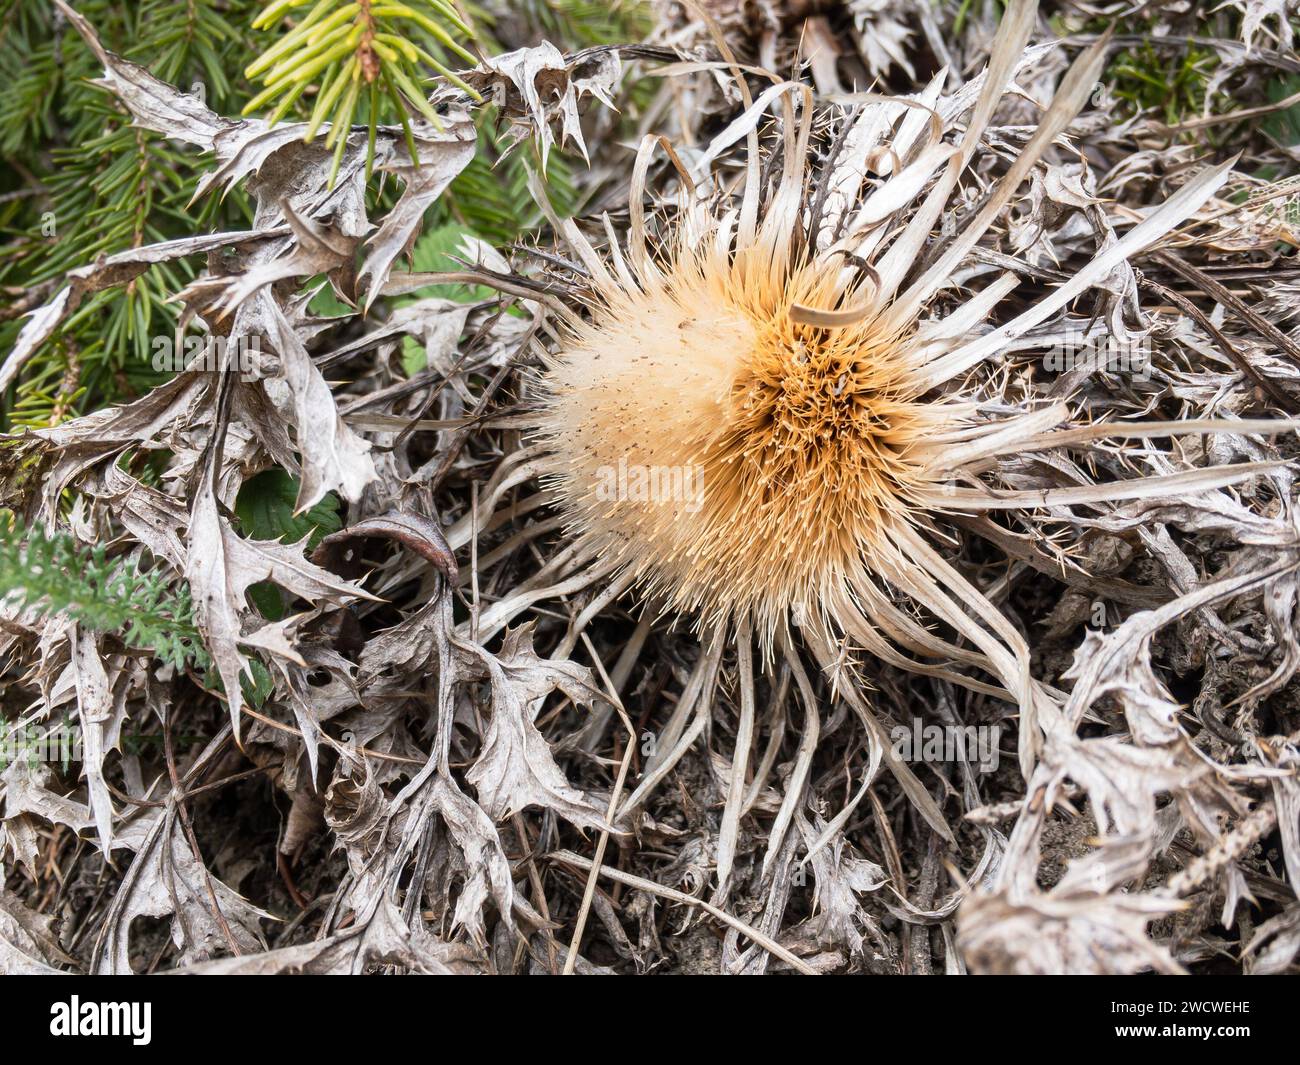 Dry Carlina acanthifolia plant known as carline thistle Stock Photo